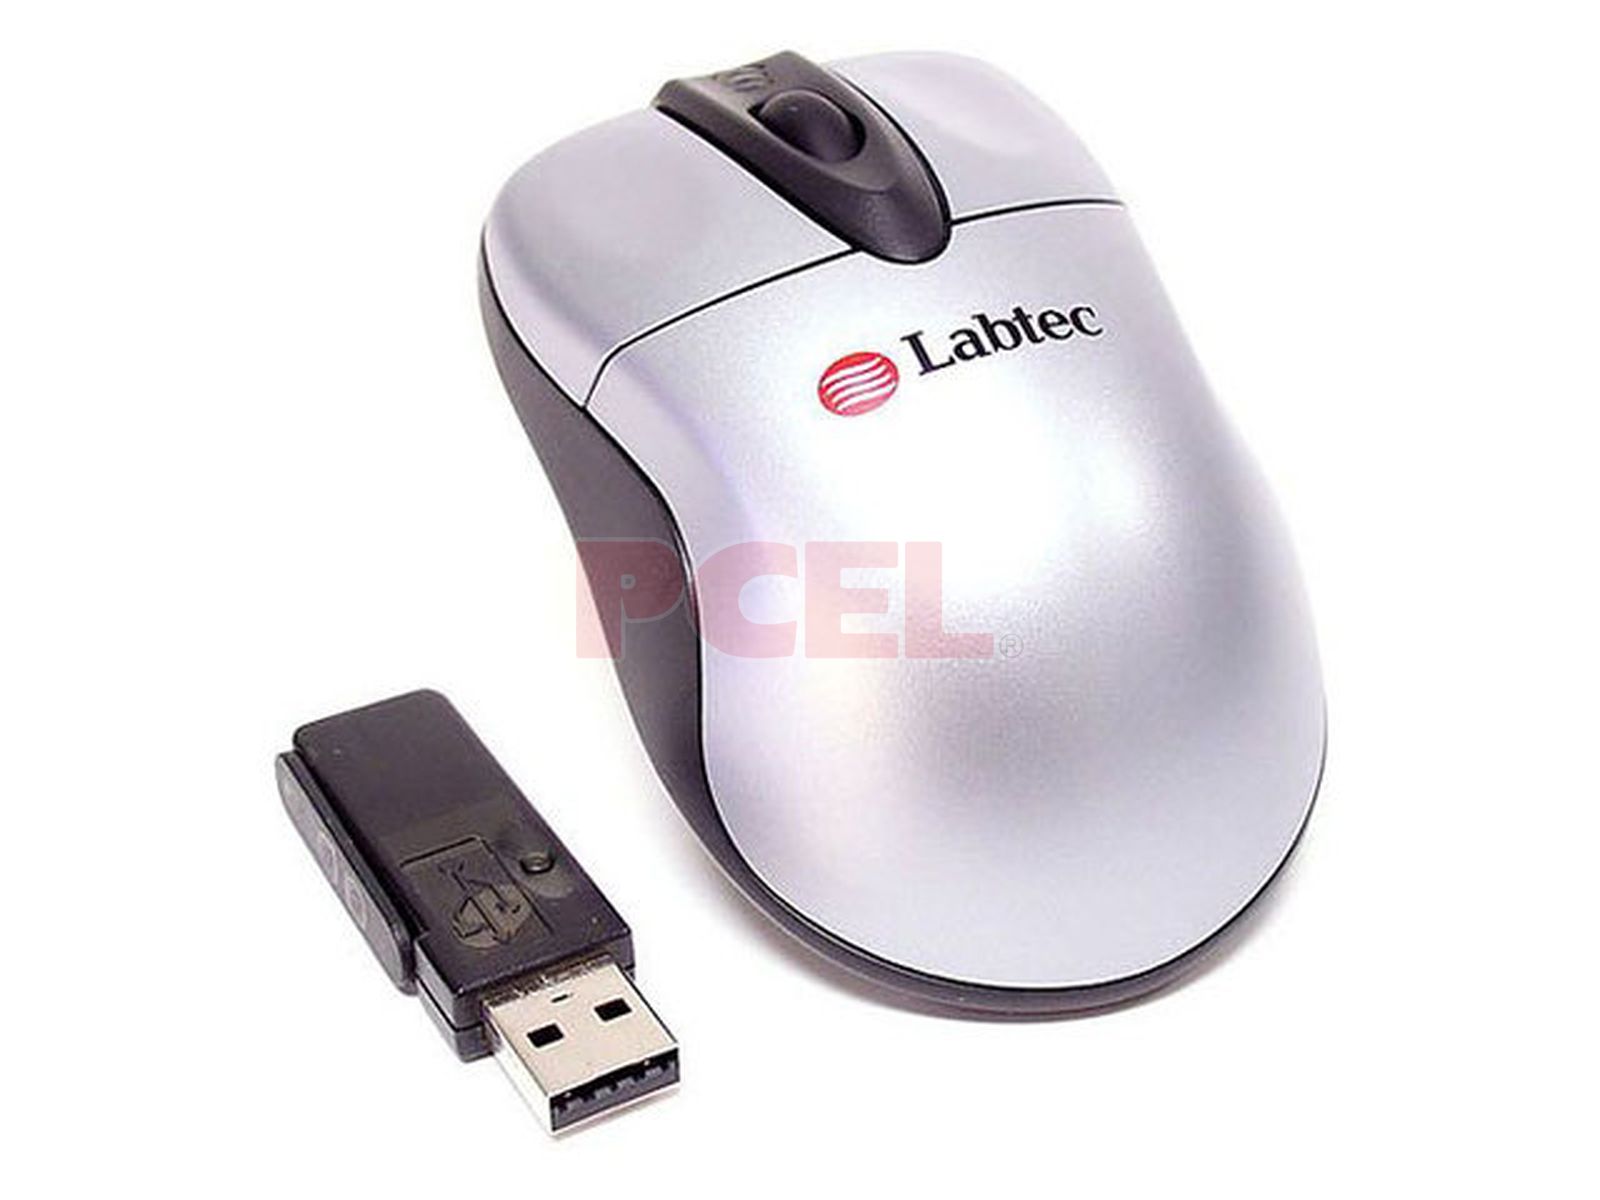 Wireless optical mouse. Мышь Labtec Mini Wireless Optical Mouse Silver USB. Мышь Labtec Wireless Mouse 953228-0914 Blue PS/2. Mr-345 Mouse. Робот Mighty Mouse (m2).